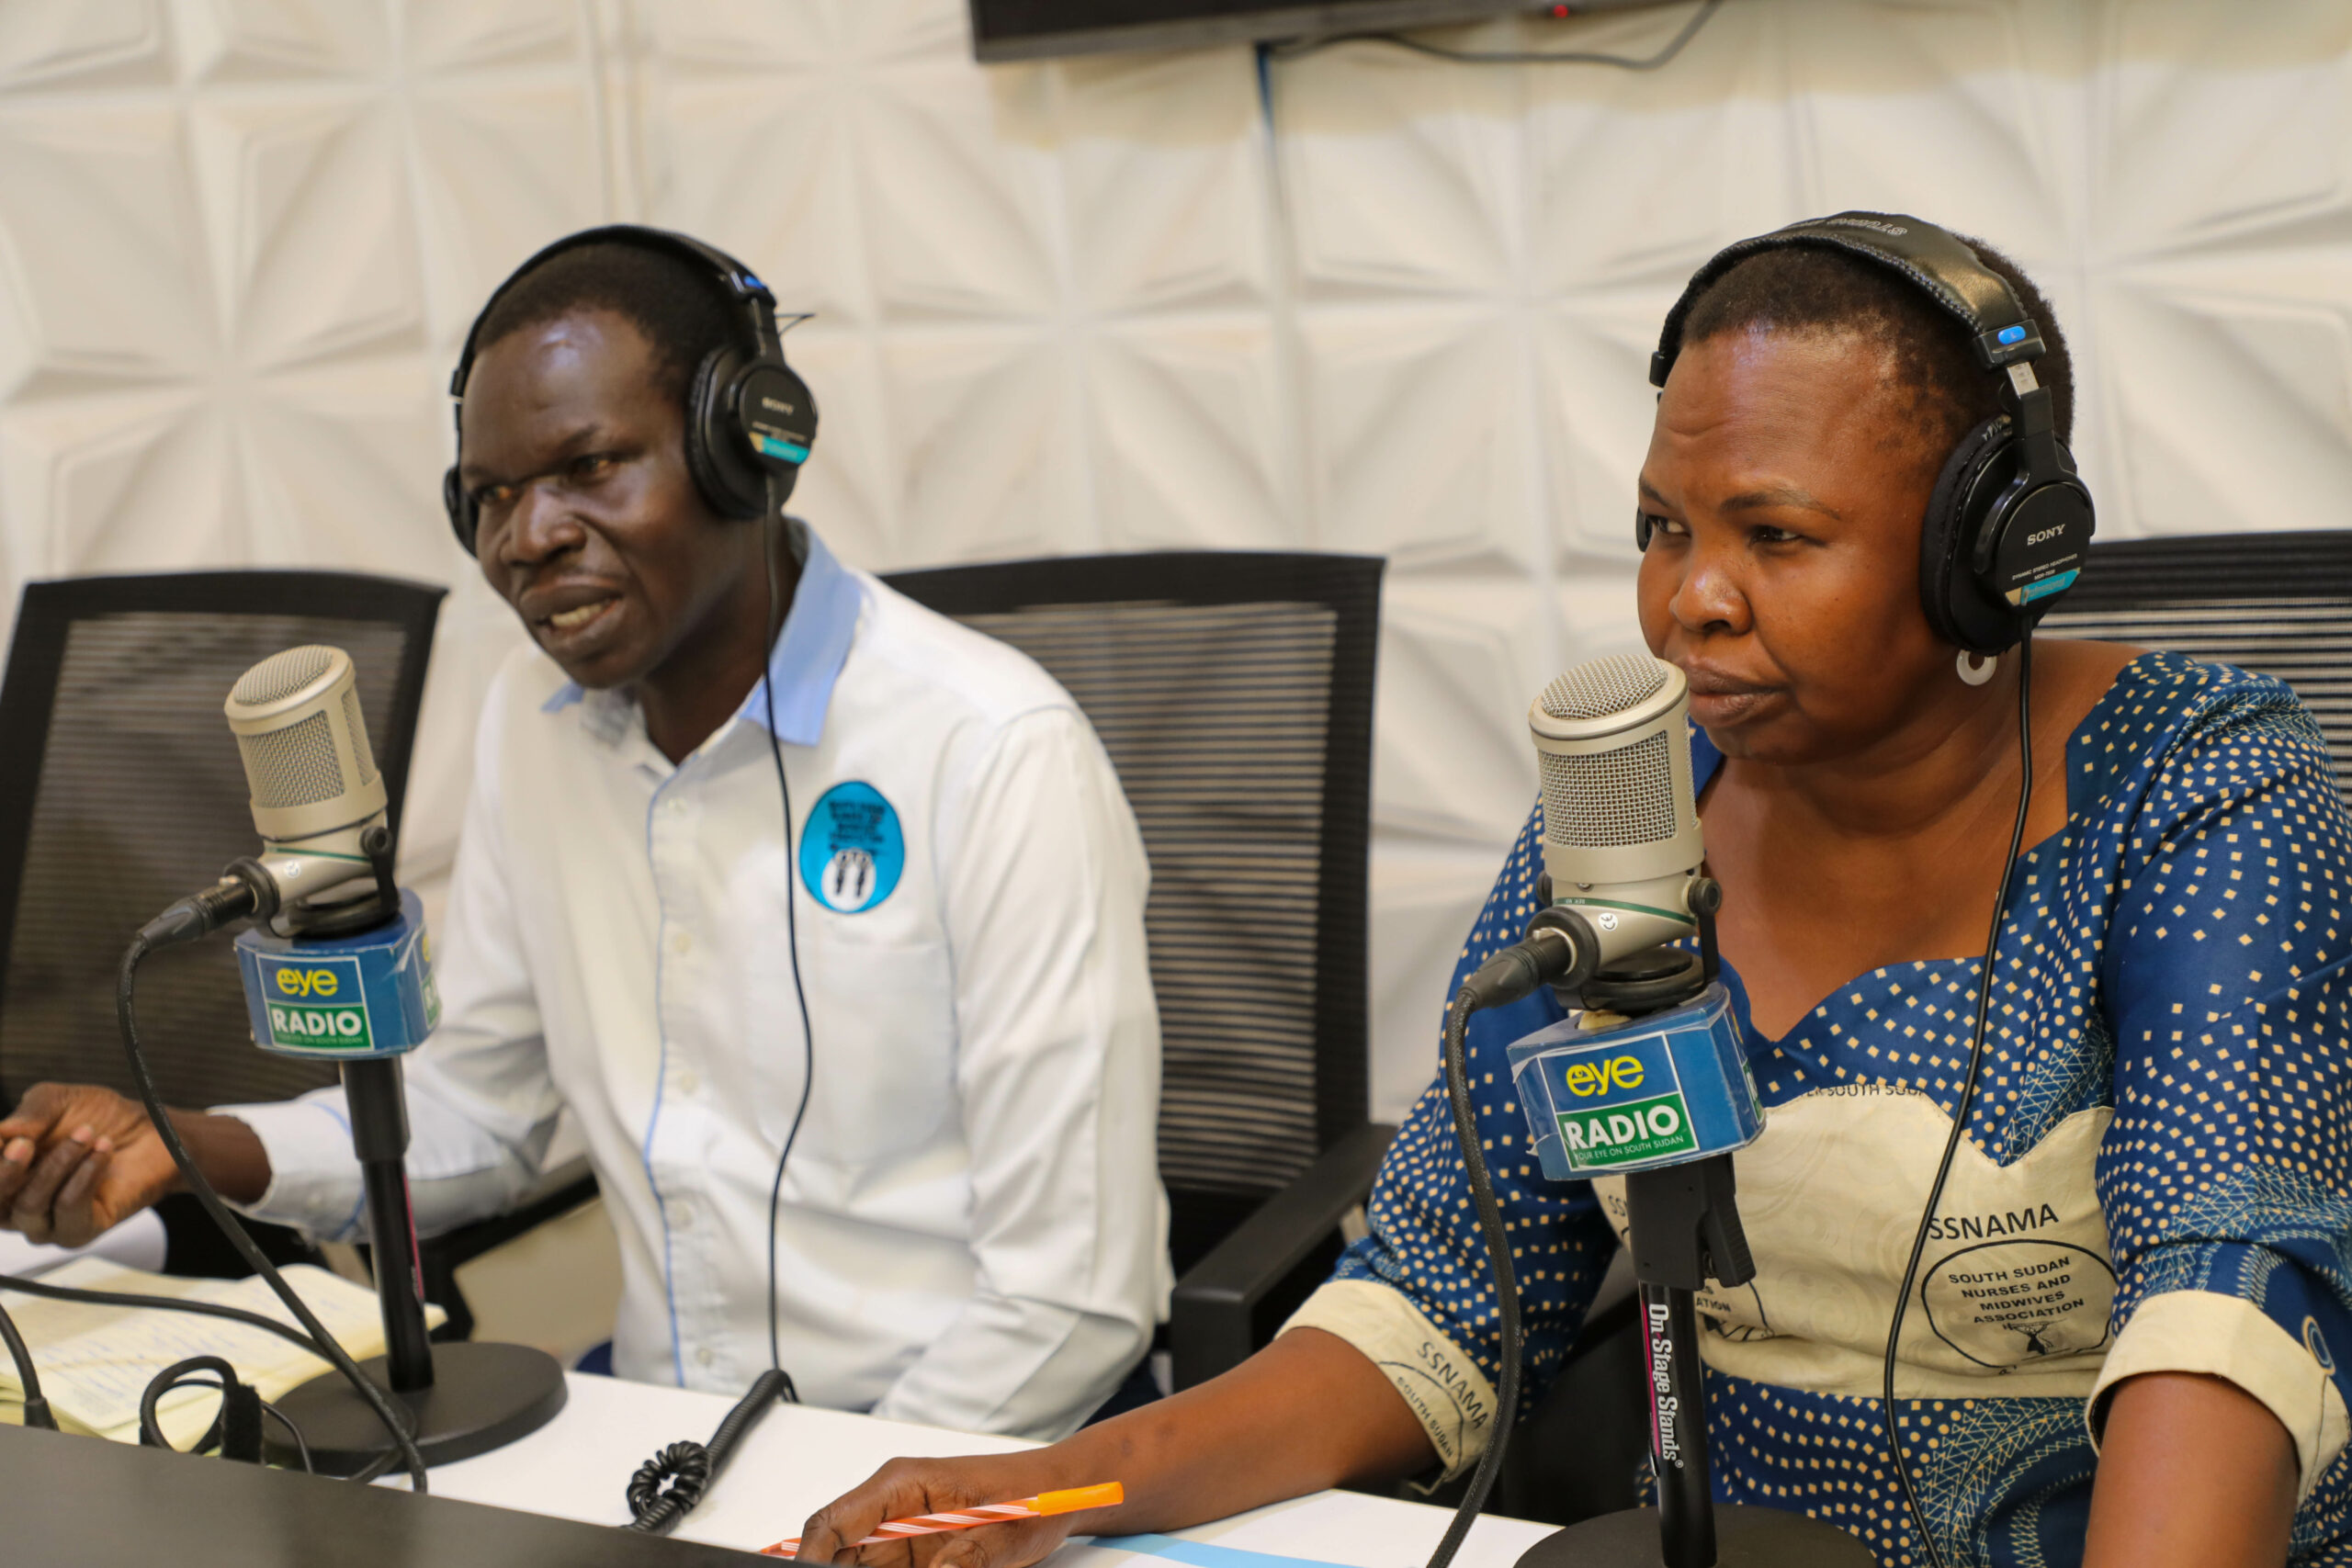 South Sudanese couples urged to space children